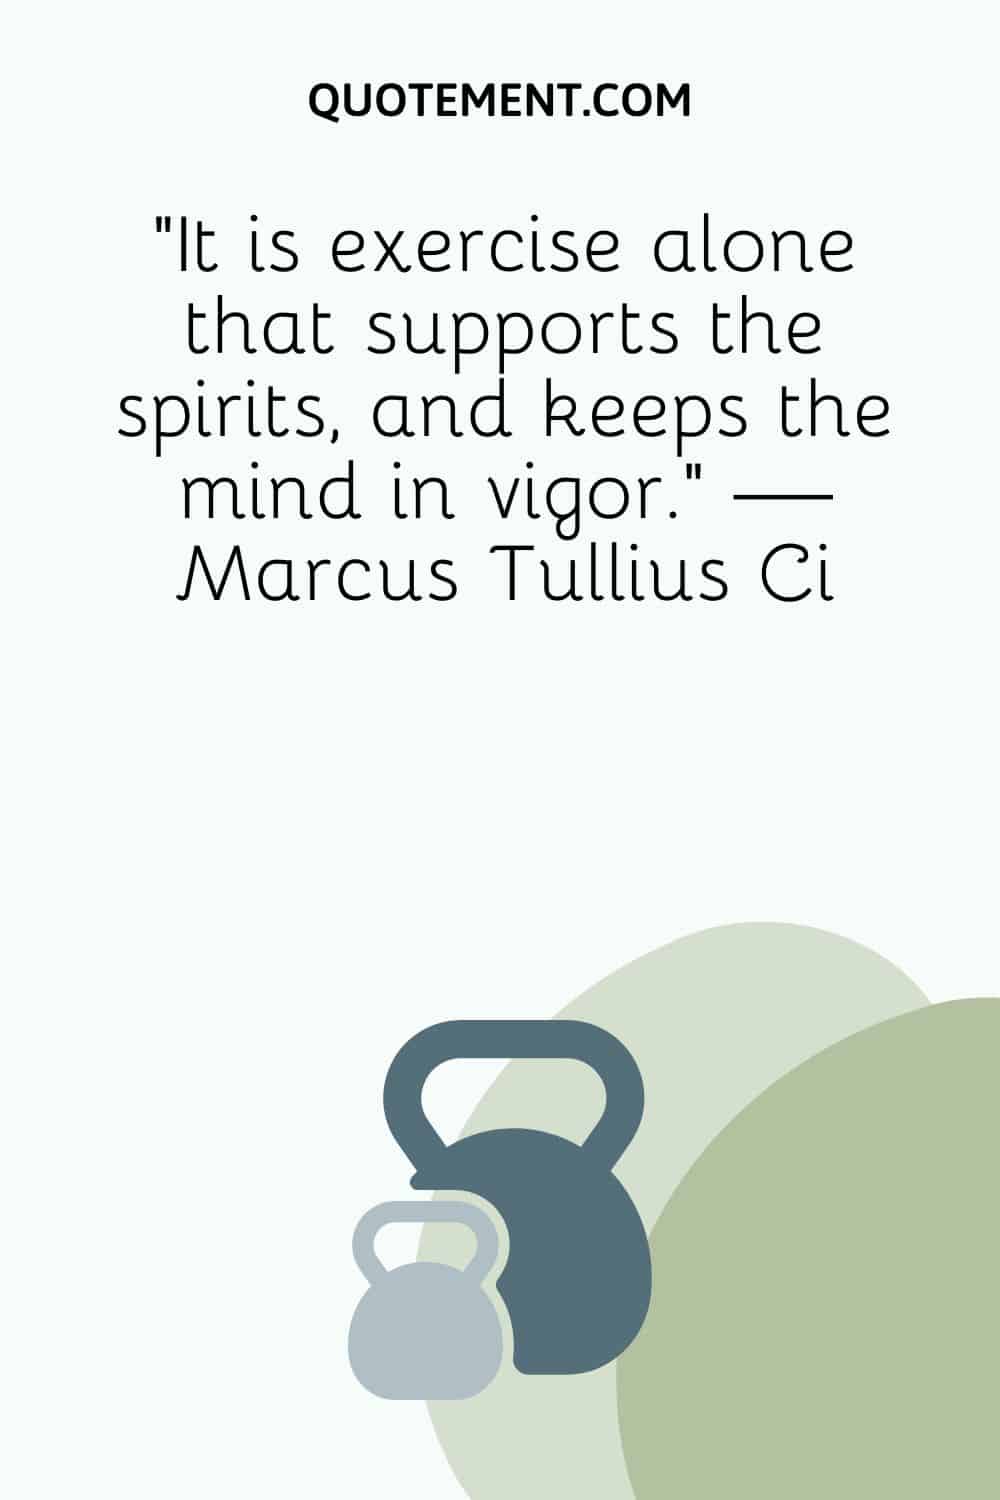 “It is exercise alone that supports the spirits, and keeps the mind in vigor.” — Marcus Tullius Ci